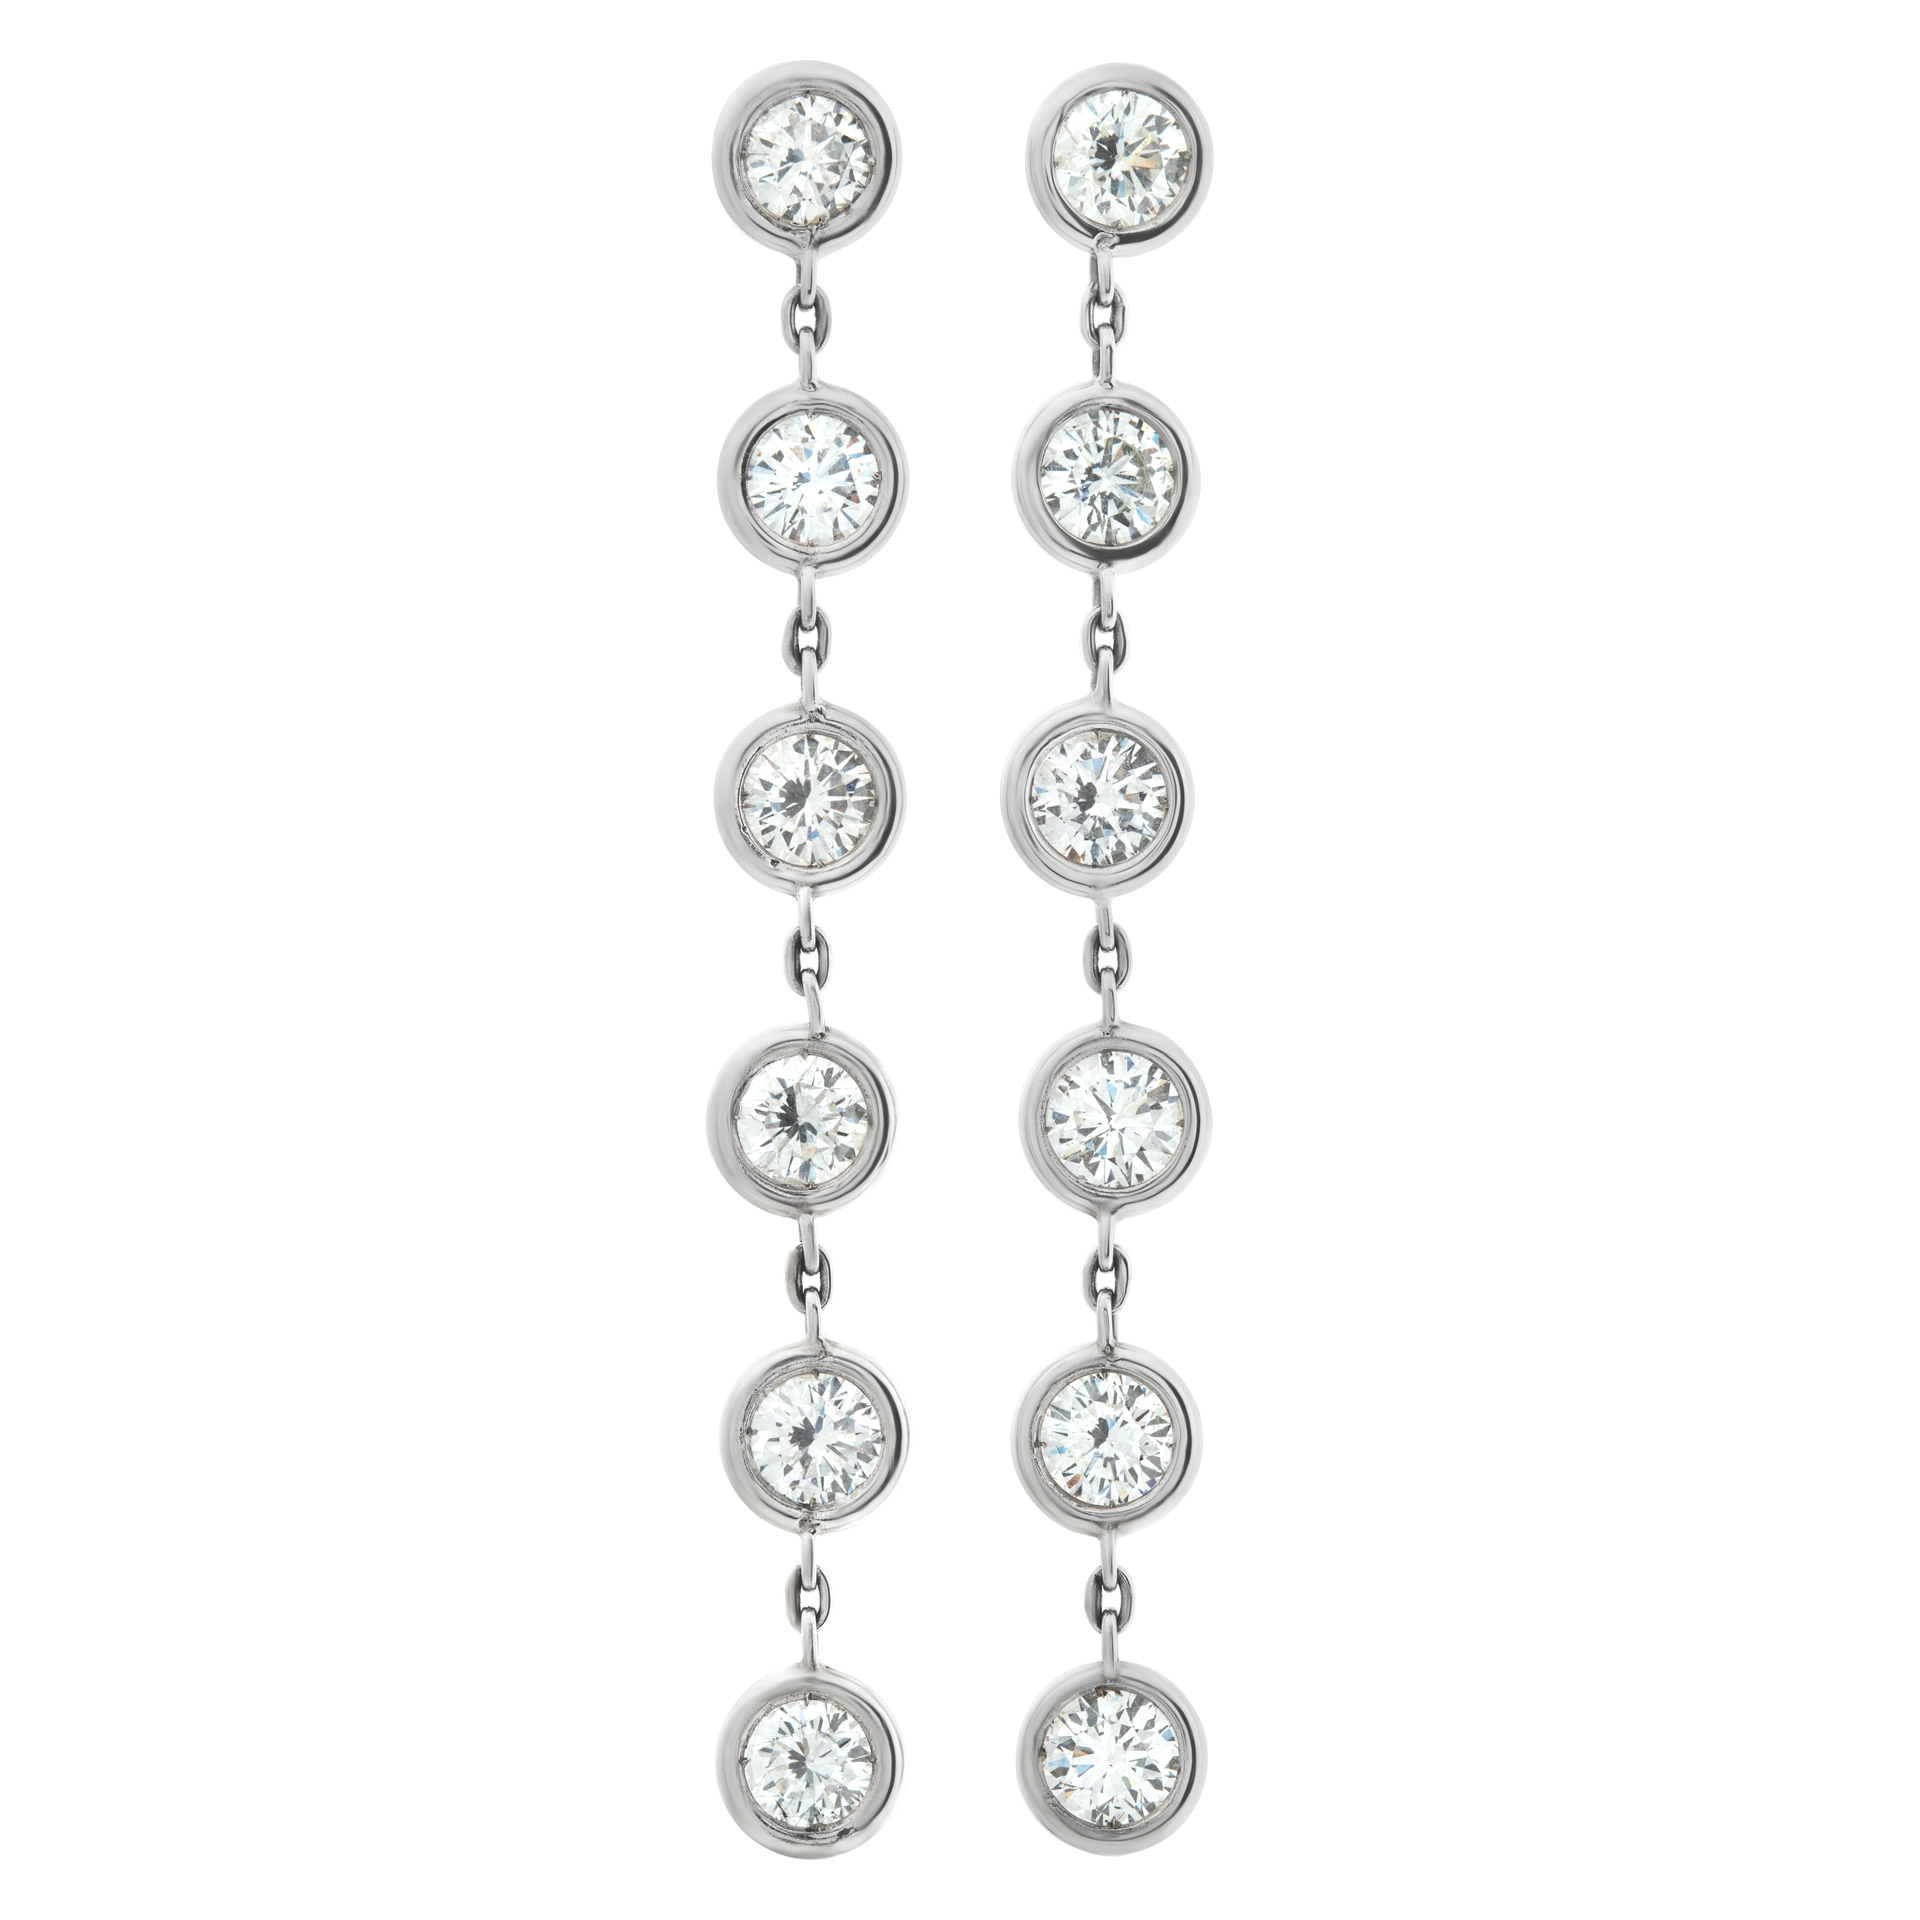 Diamond drop earrings with approximately 5 carats total weight in round diamonds